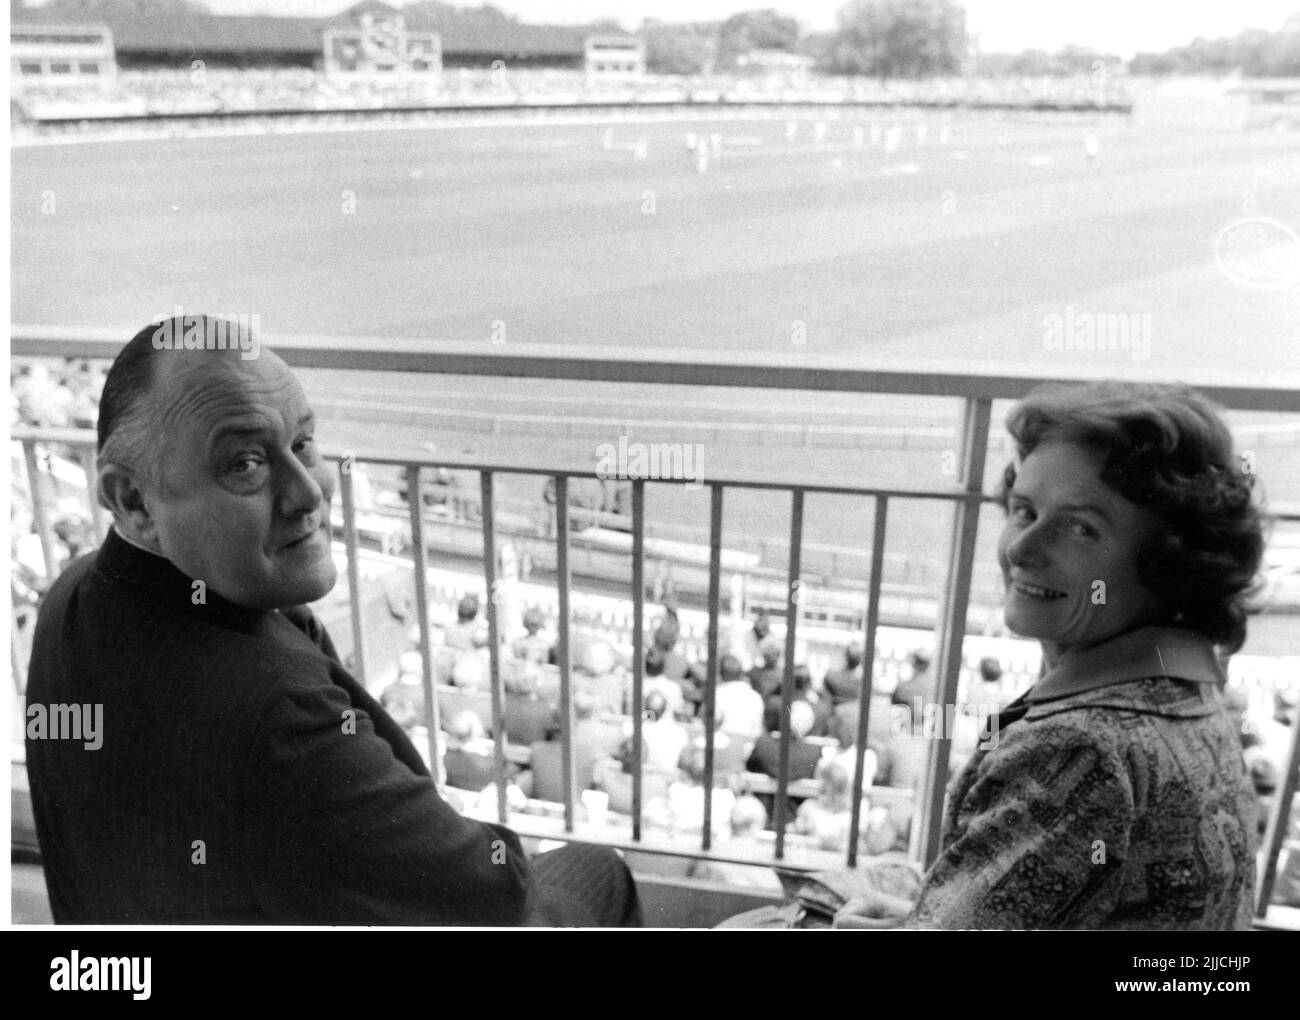 New Zealand Prime Minister Robert Muldoon is accompanied by accompanied by his wife Thea,cwatch the England versus Australia cricket  test match at Lord's Cricket Ground. London, on Thursday June 16, 1977.   Credit: Rob Taggart/Alamy Stock Photo